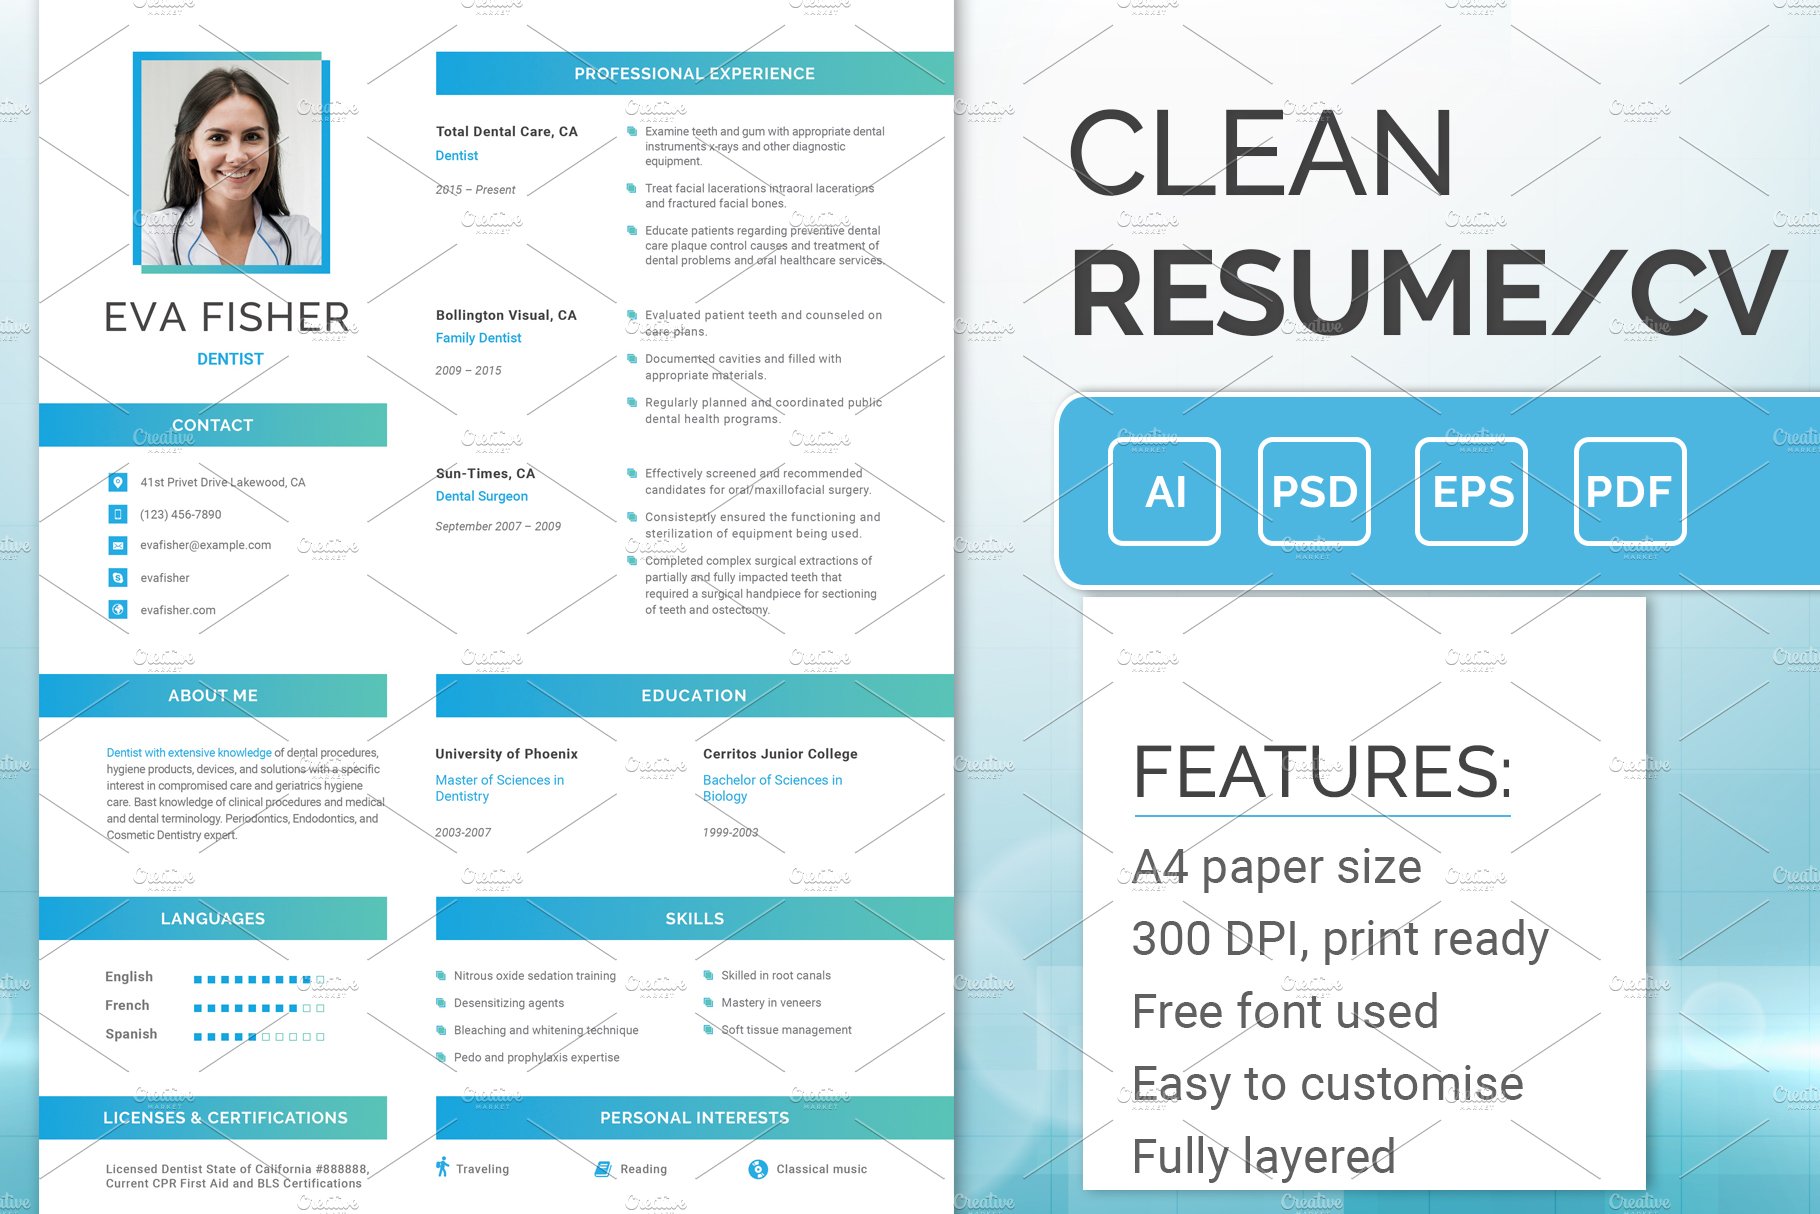 Printable Resume for Dentist preview image.